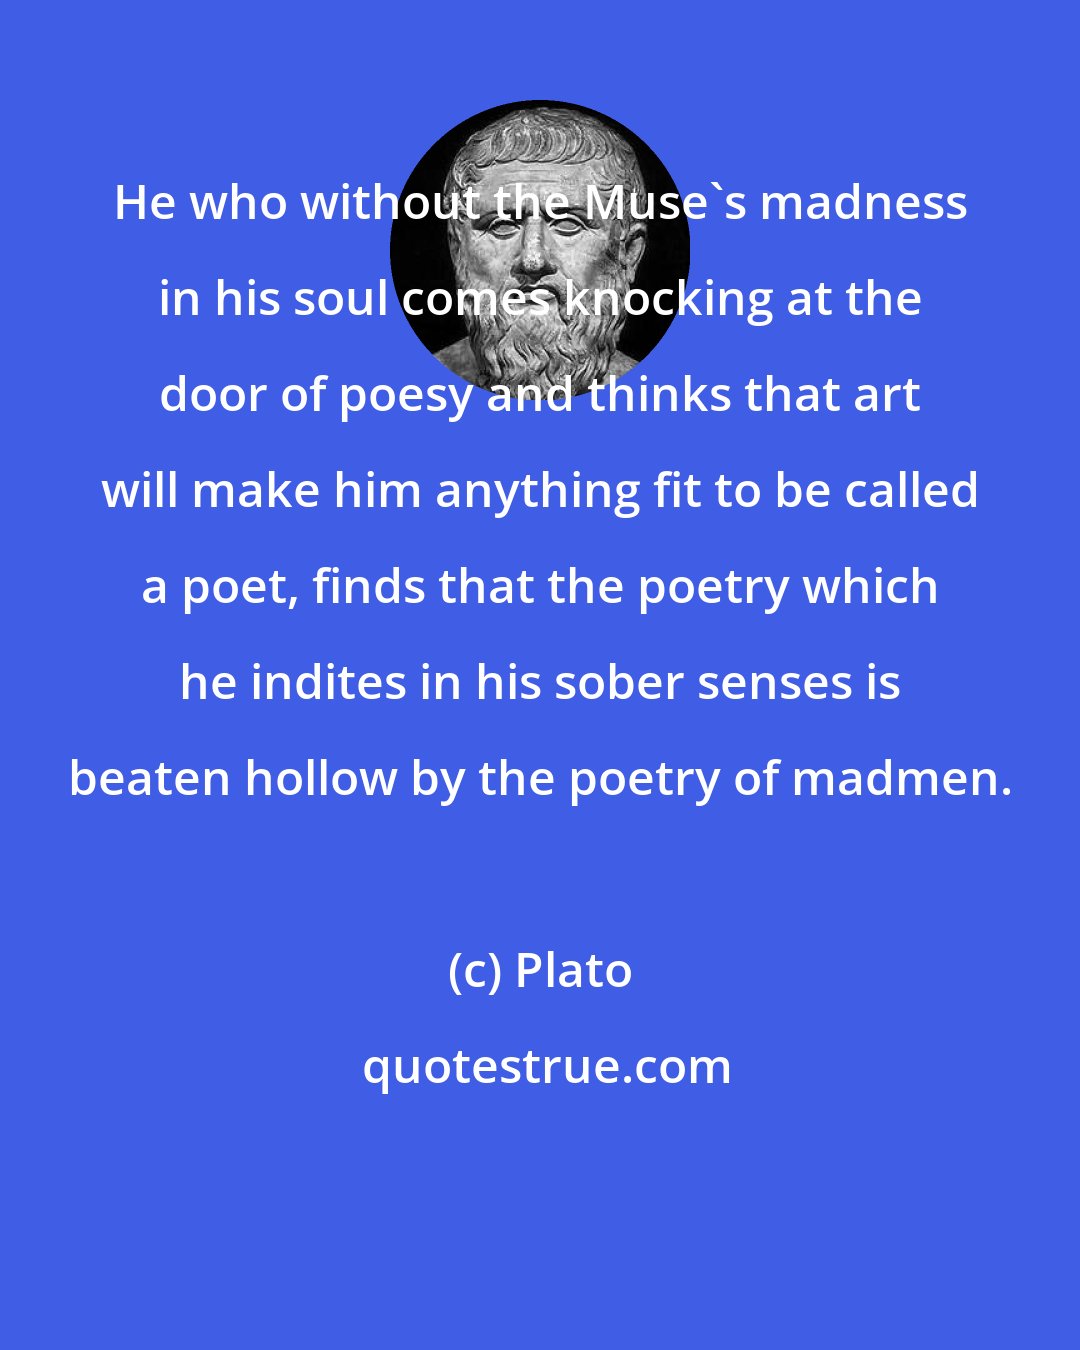 Plato: He who without the Muse's madness in his soul comes knocking at the door of poesy and thinks that art will make him anything fit to be called a poet, finds that the poetry which he indites in his sober senses is beaten hollow by the poetry of madmen.